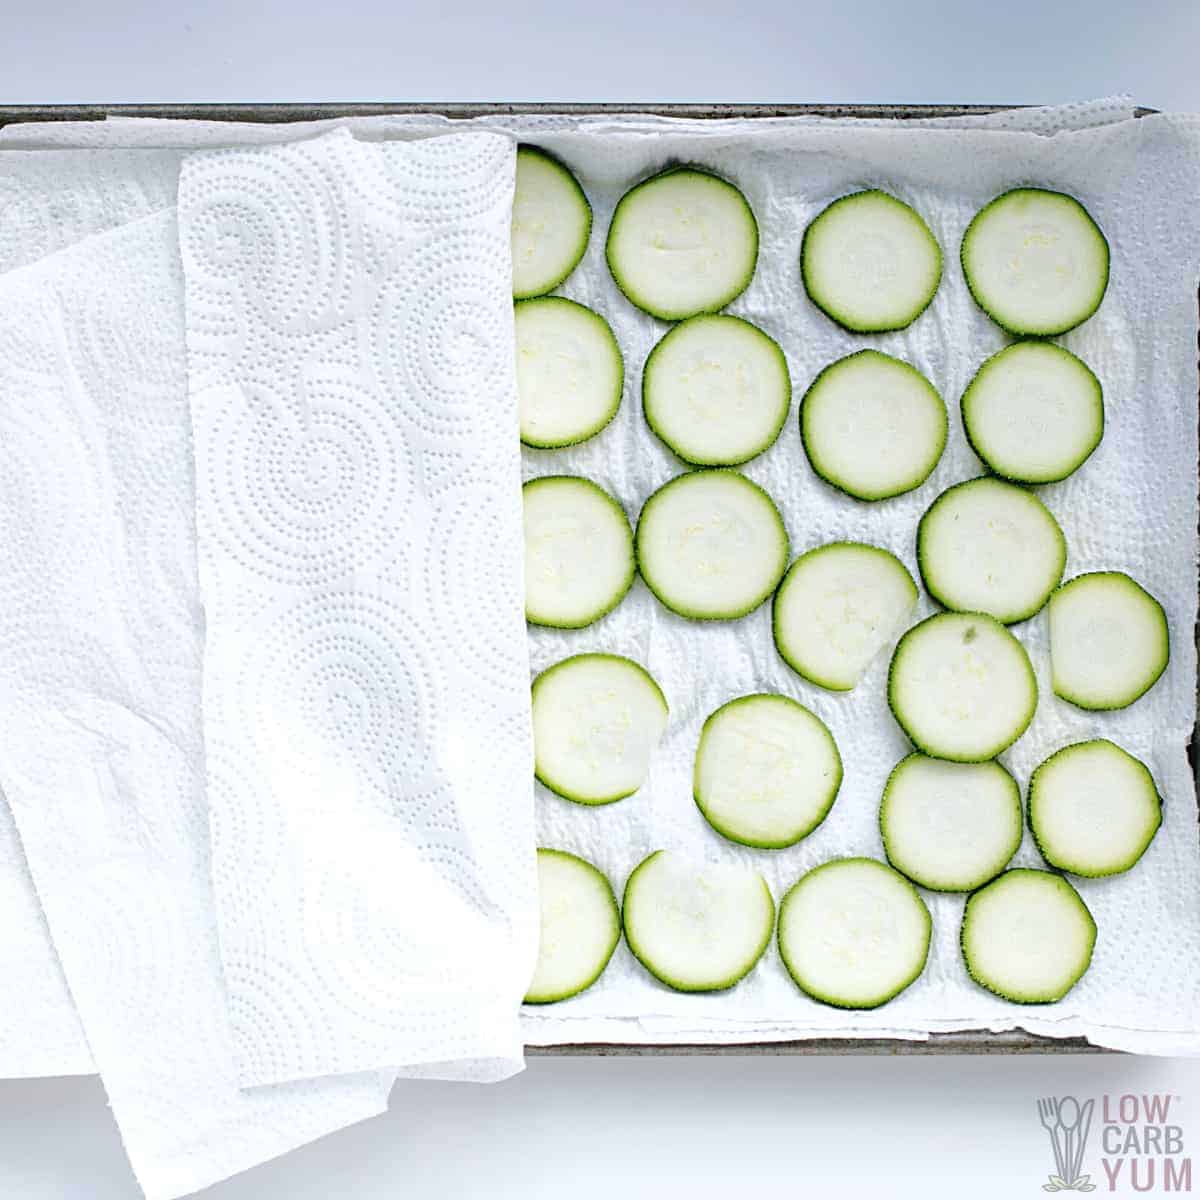 zucchini slices between paper towel layers.